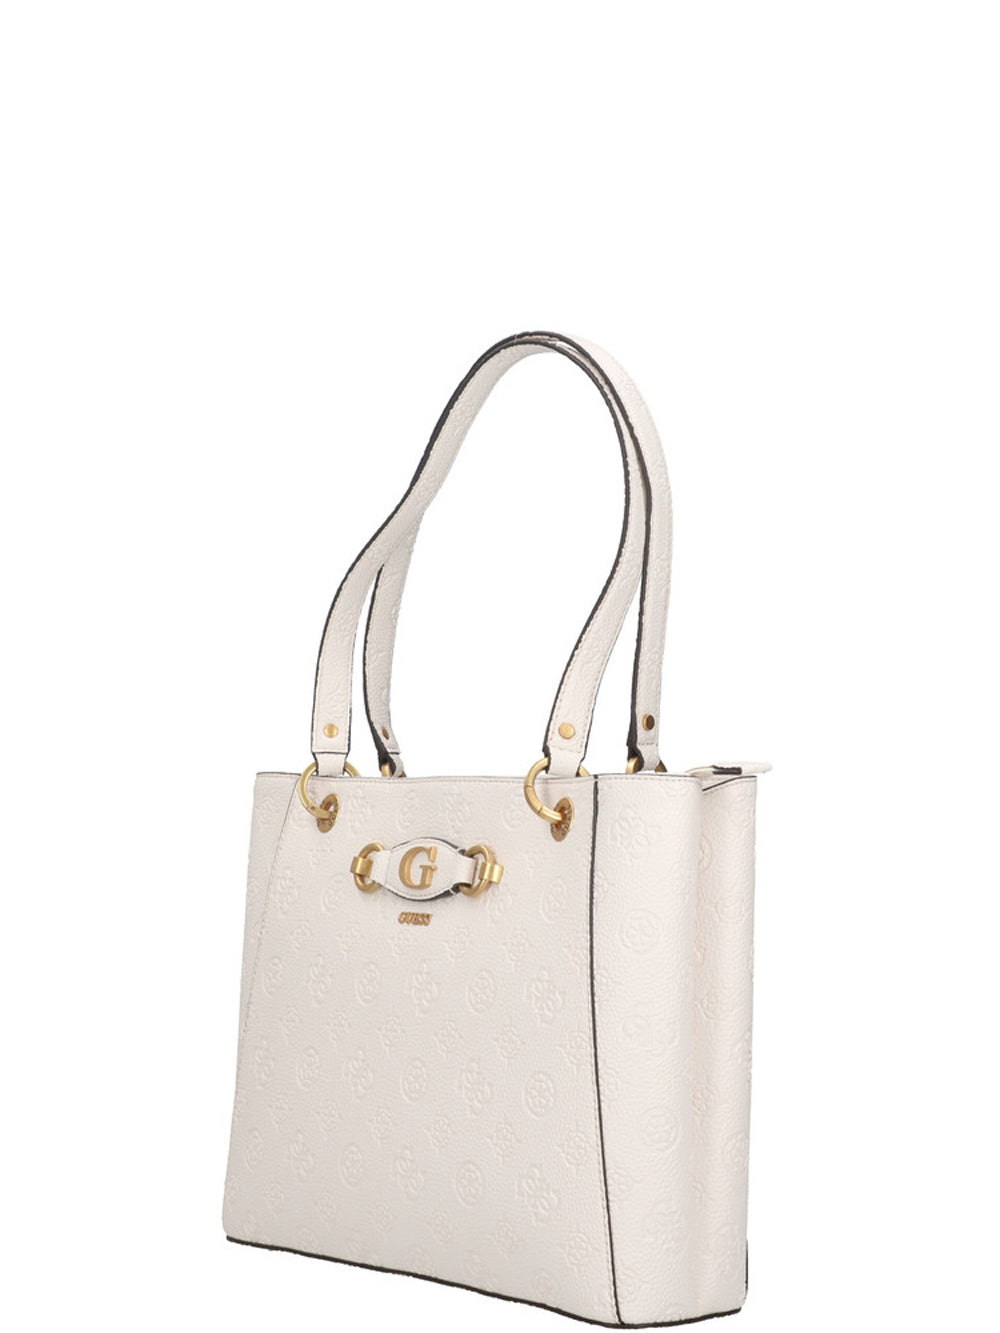 GUESS ACC D PRE Shopping bag tote Izzy peony noel